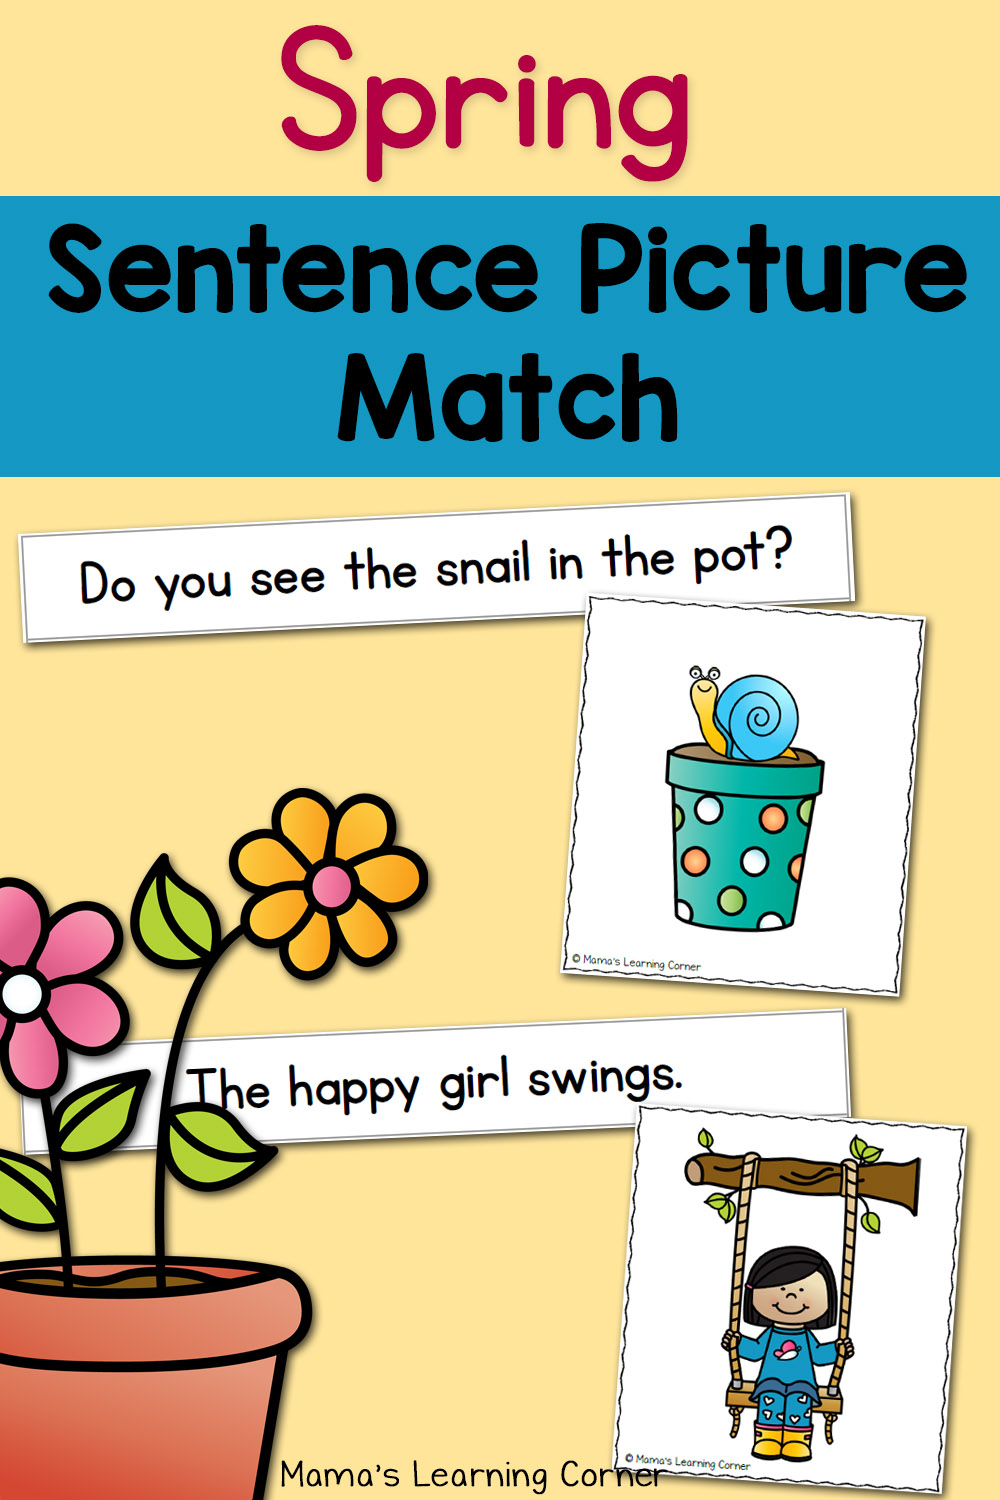 Spring Sentence Picture Match